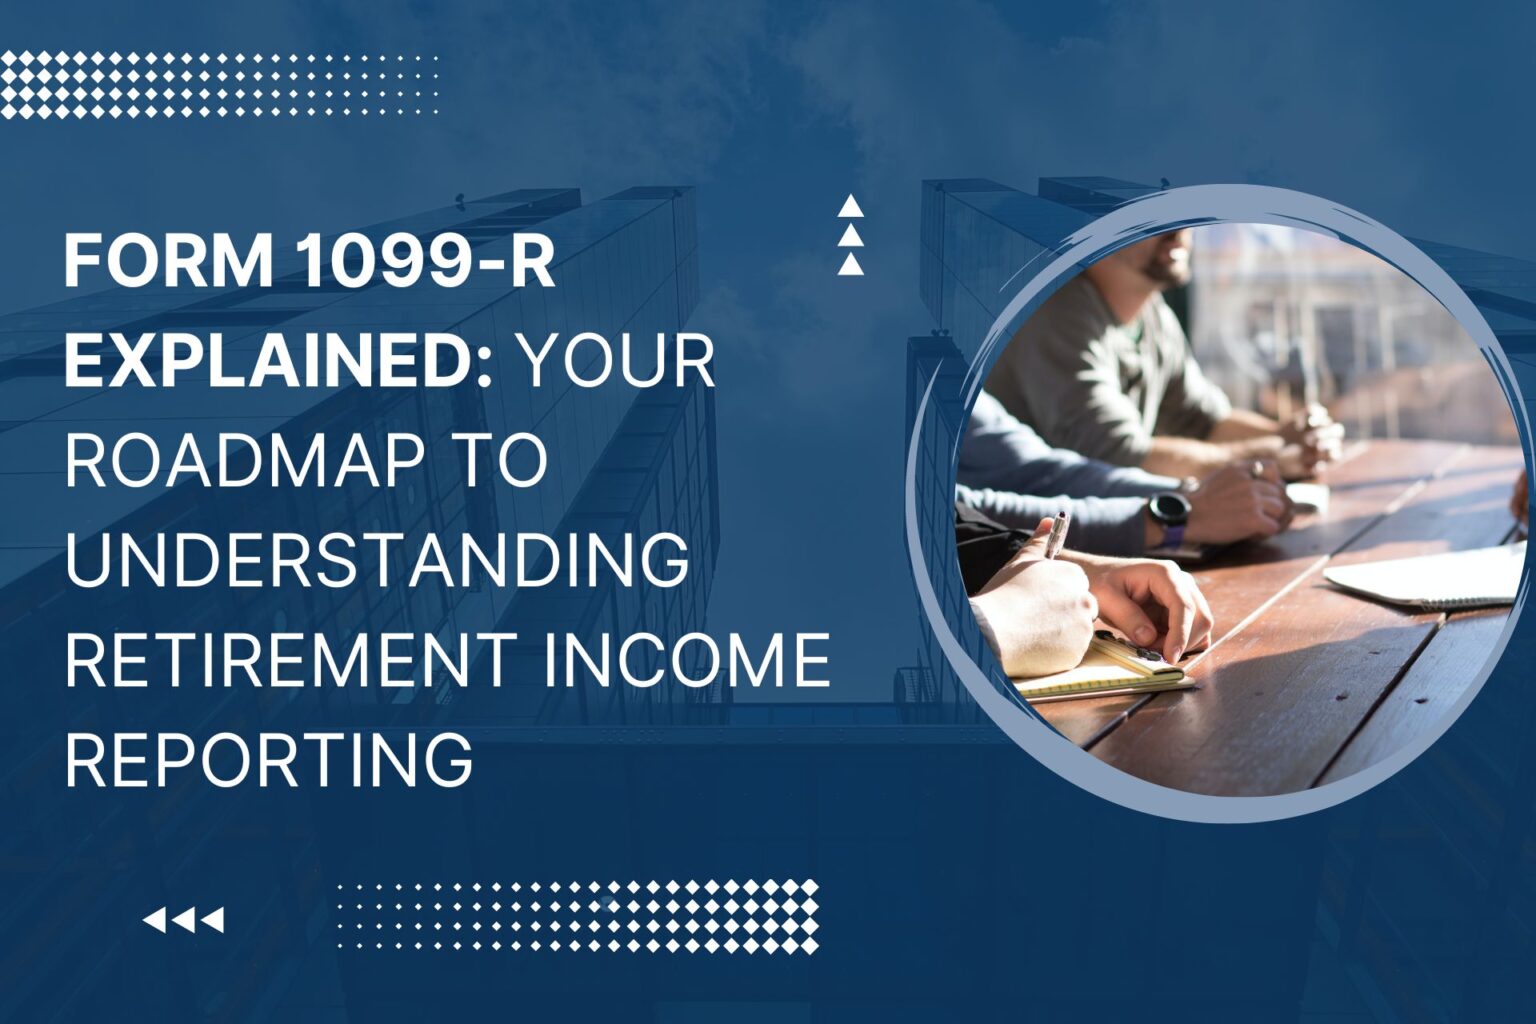 Form 1099 R Explained  Your Roadmap To Understanding Retirement Income Reporting 1536x1024 